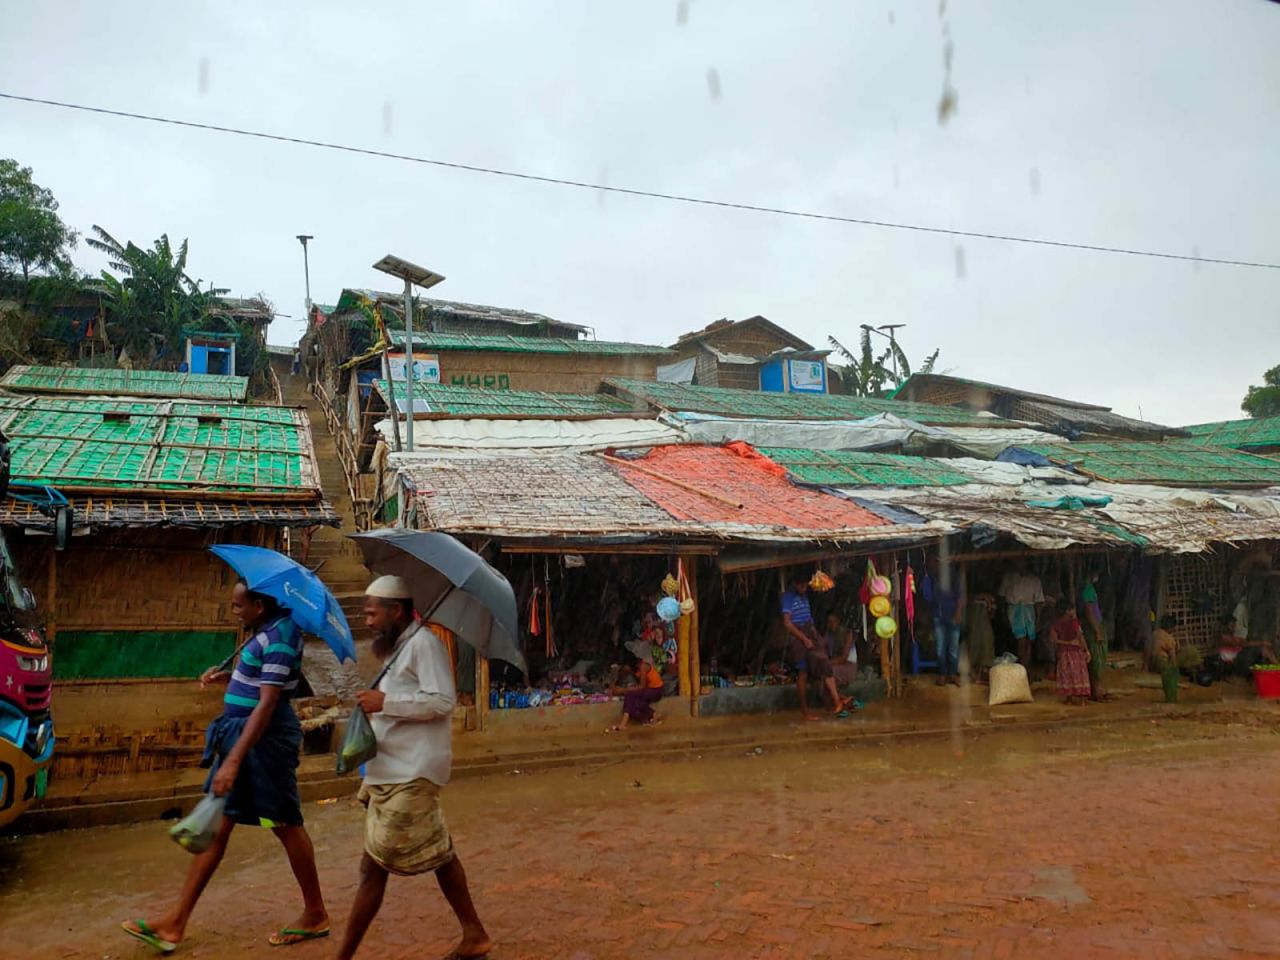 Roofs are seen covered with plastic sheets as part of preparations for Cyclone Amphan in Cox's Bazar, Bangladesh, on Tuesday, May 20.